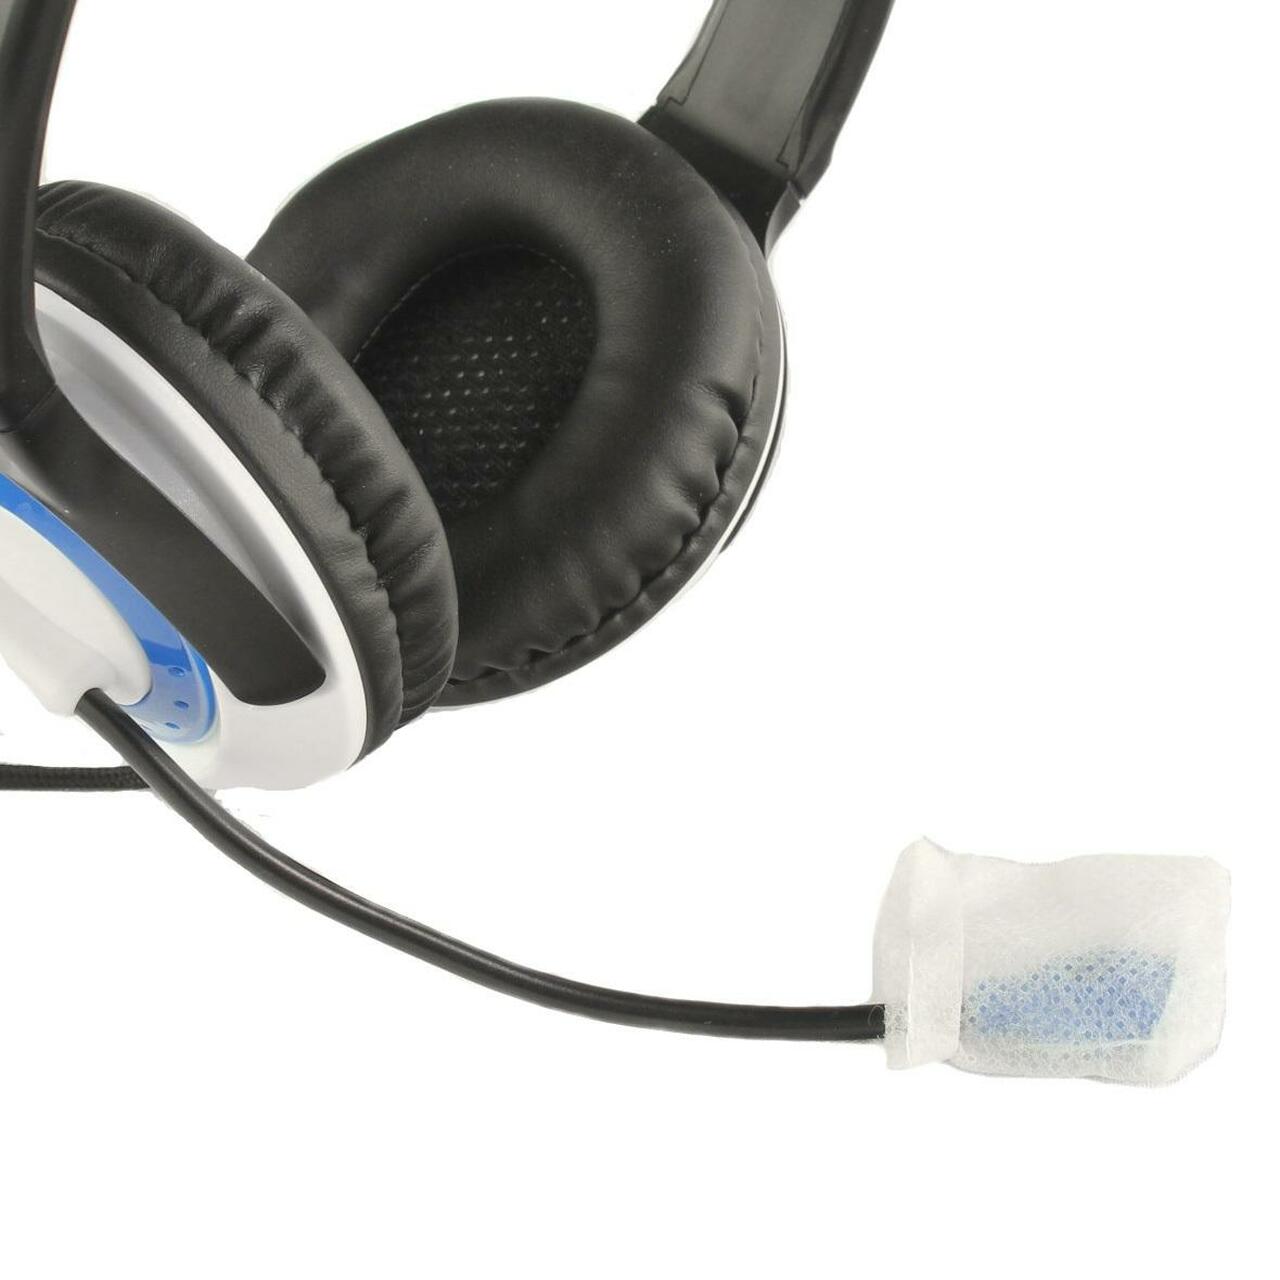 Disposable Headset Microphone Sanitary Covers - Bag of 100